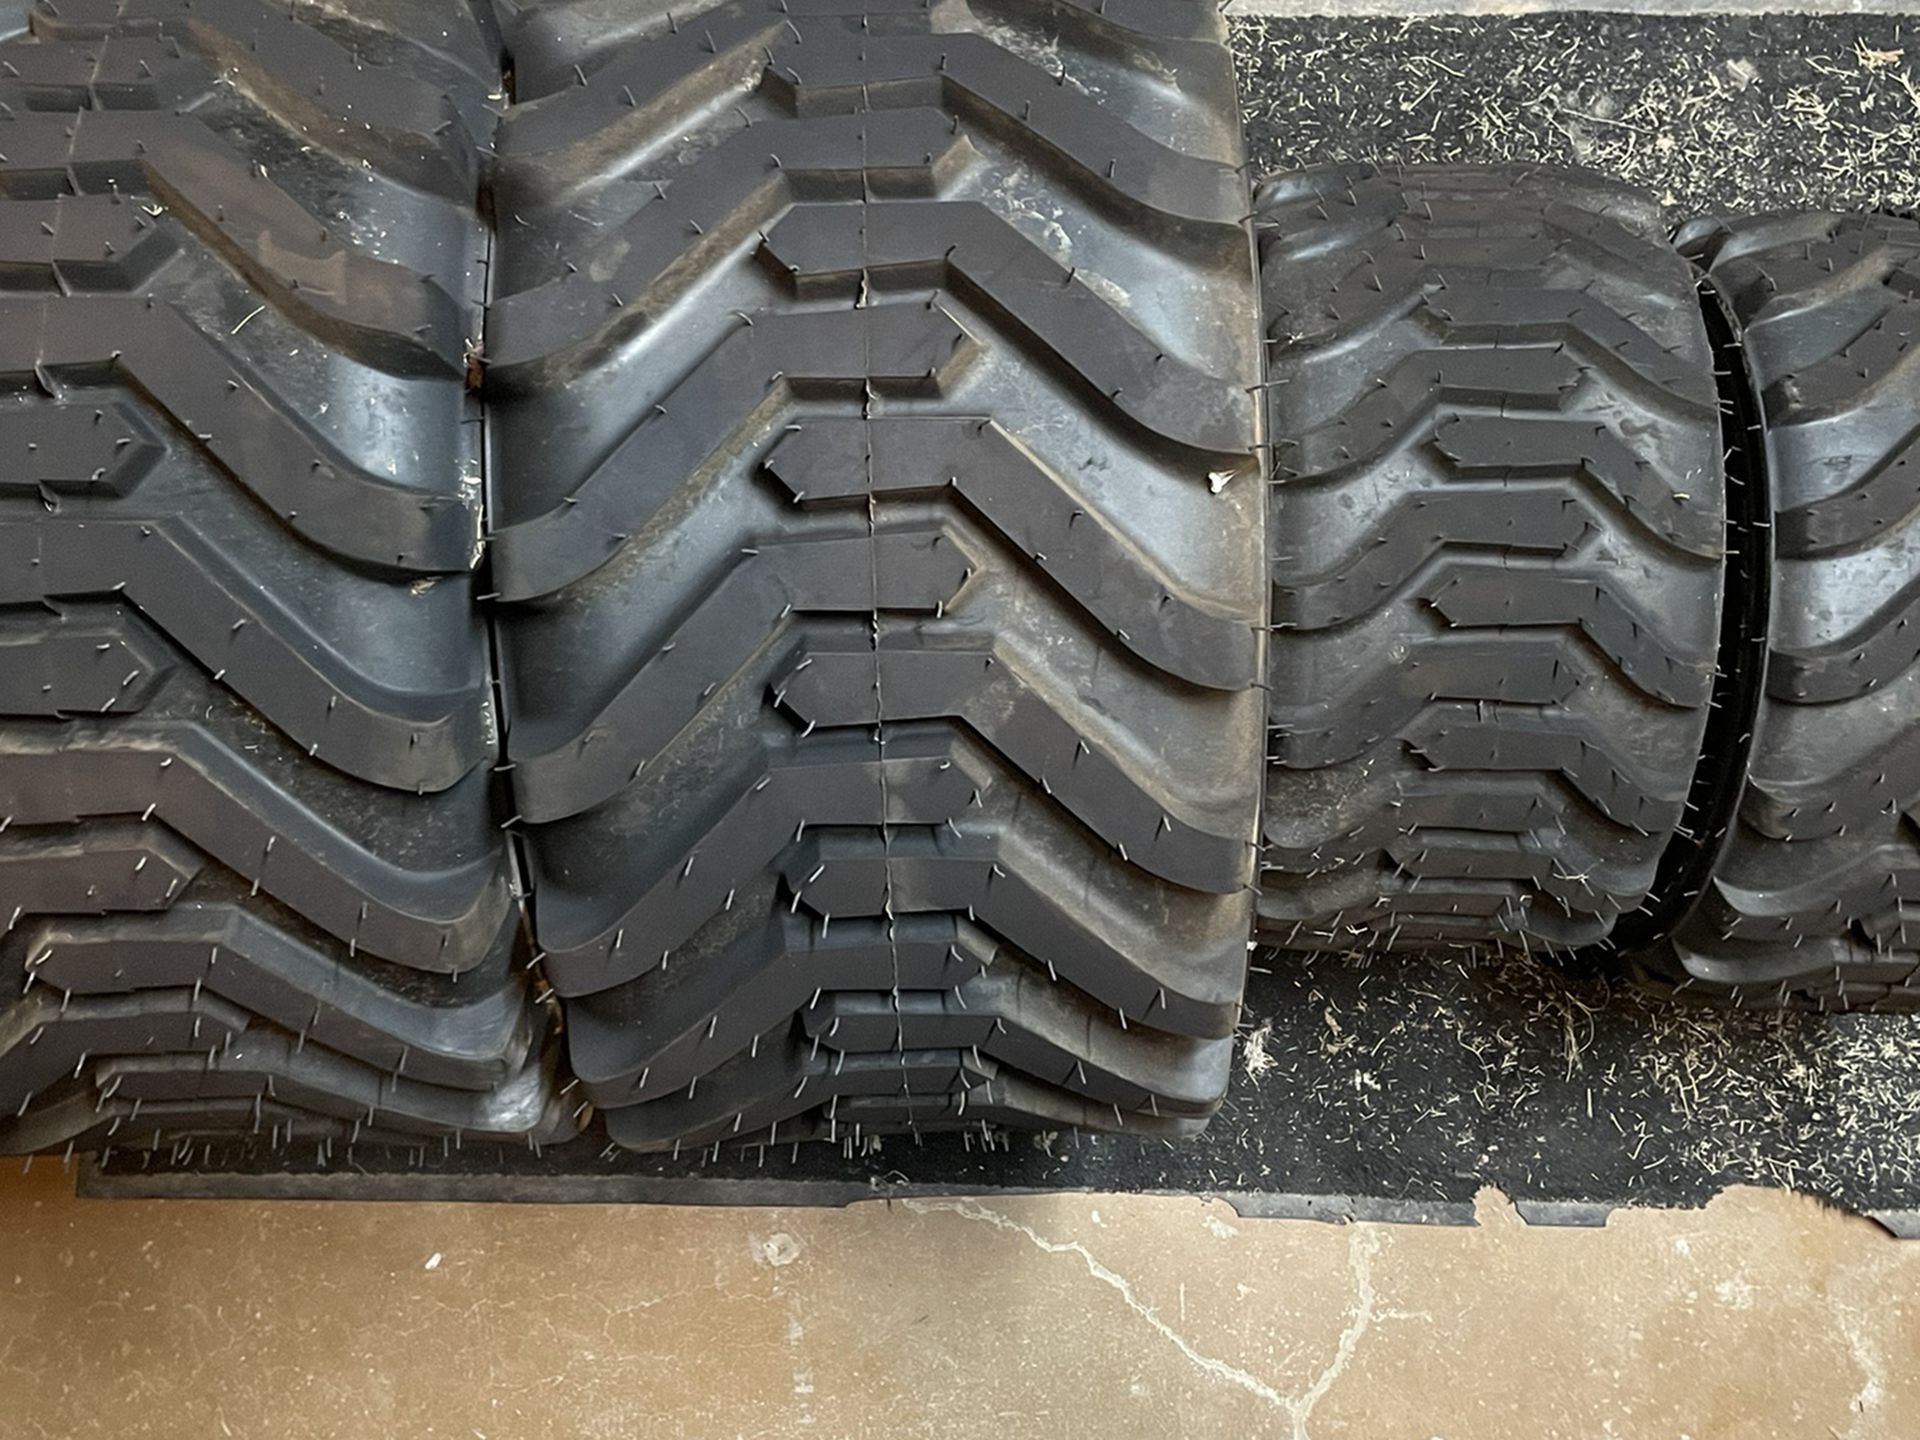 New R4 Compact Tractor Tire